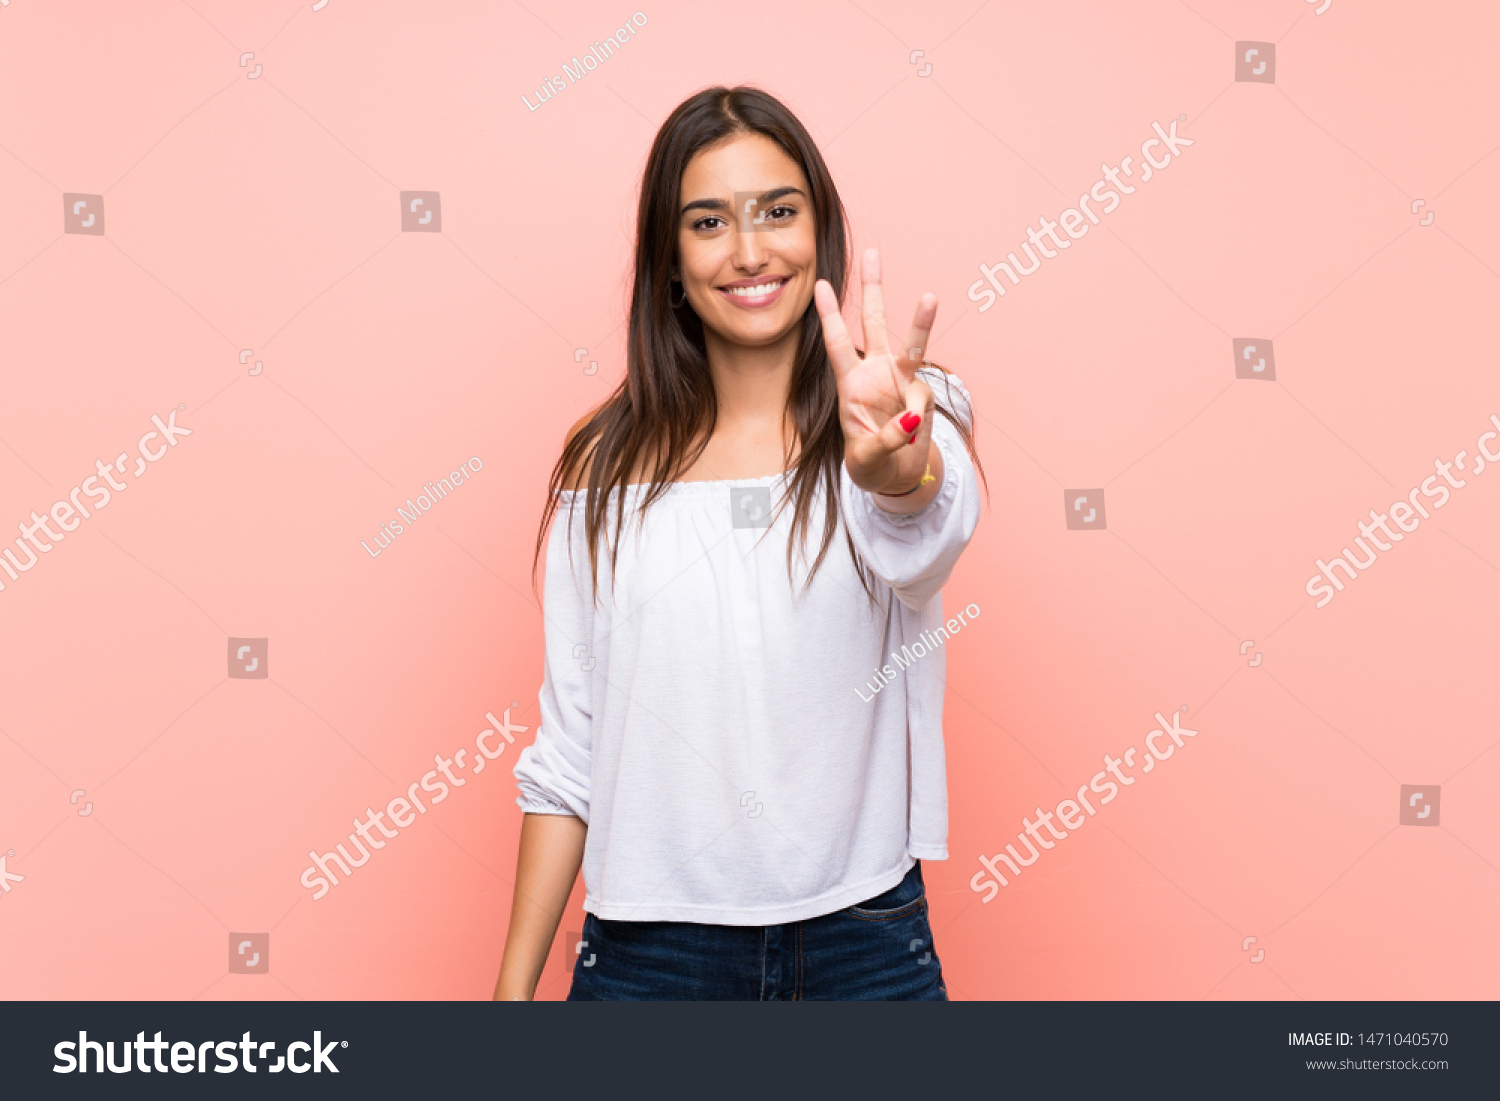 Young woman over isolated pink background happy and counting three with fingers #1471040570